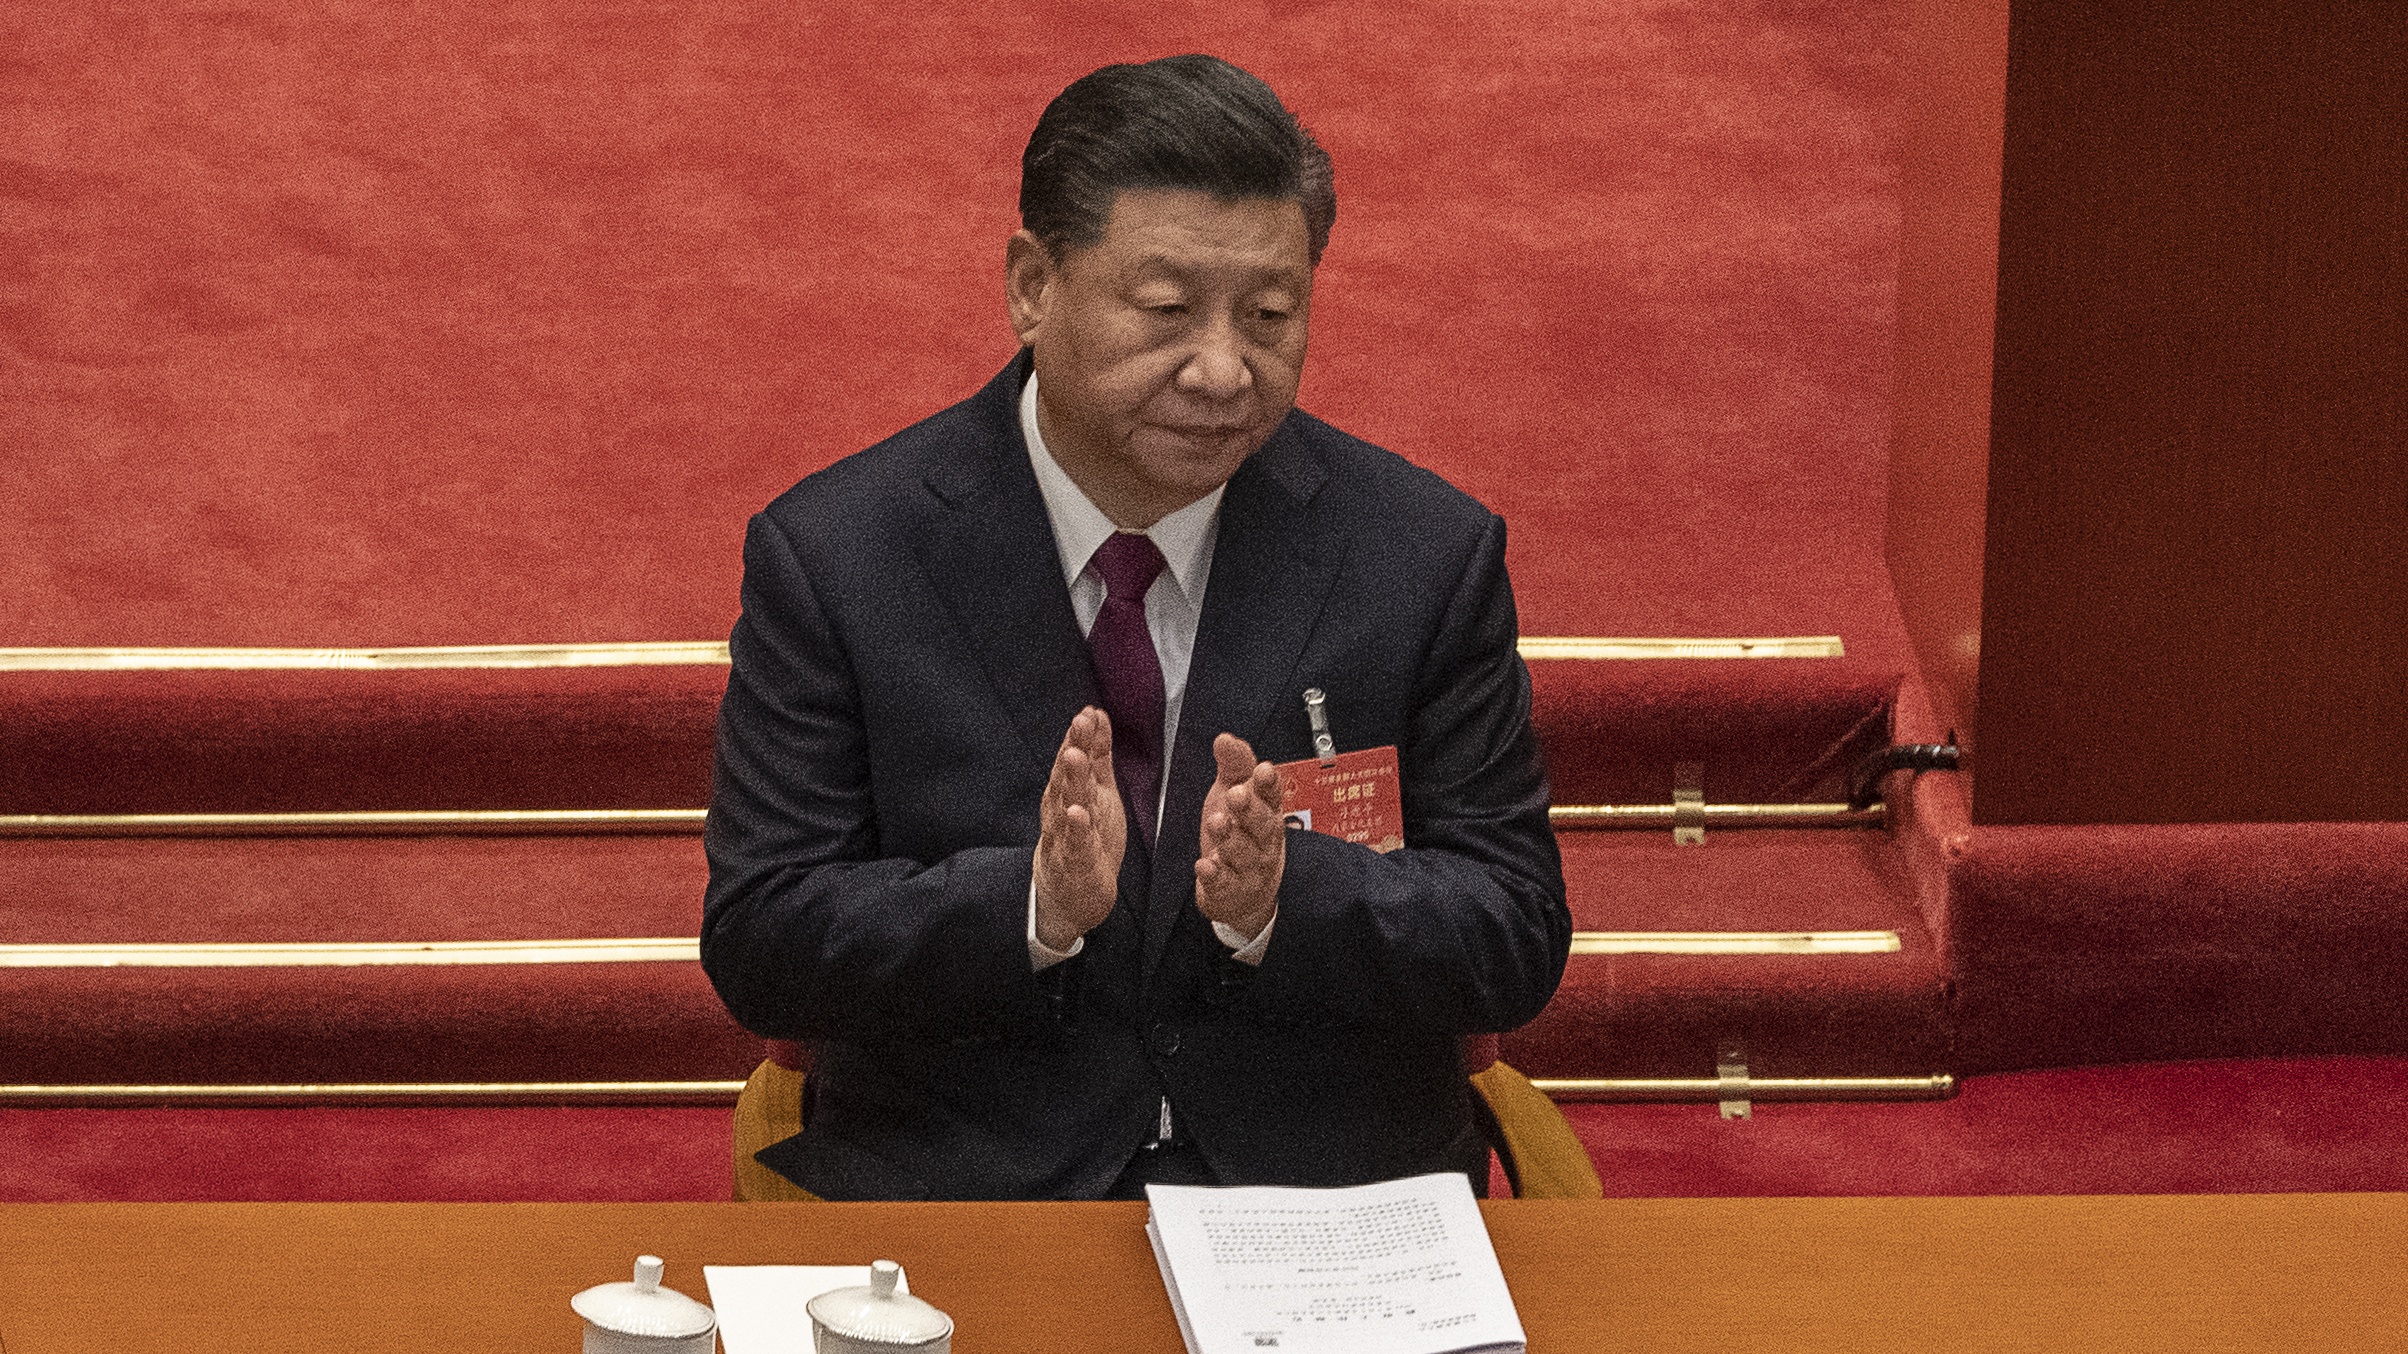 Xi Jinping at the opening of the National People’s Congress in March